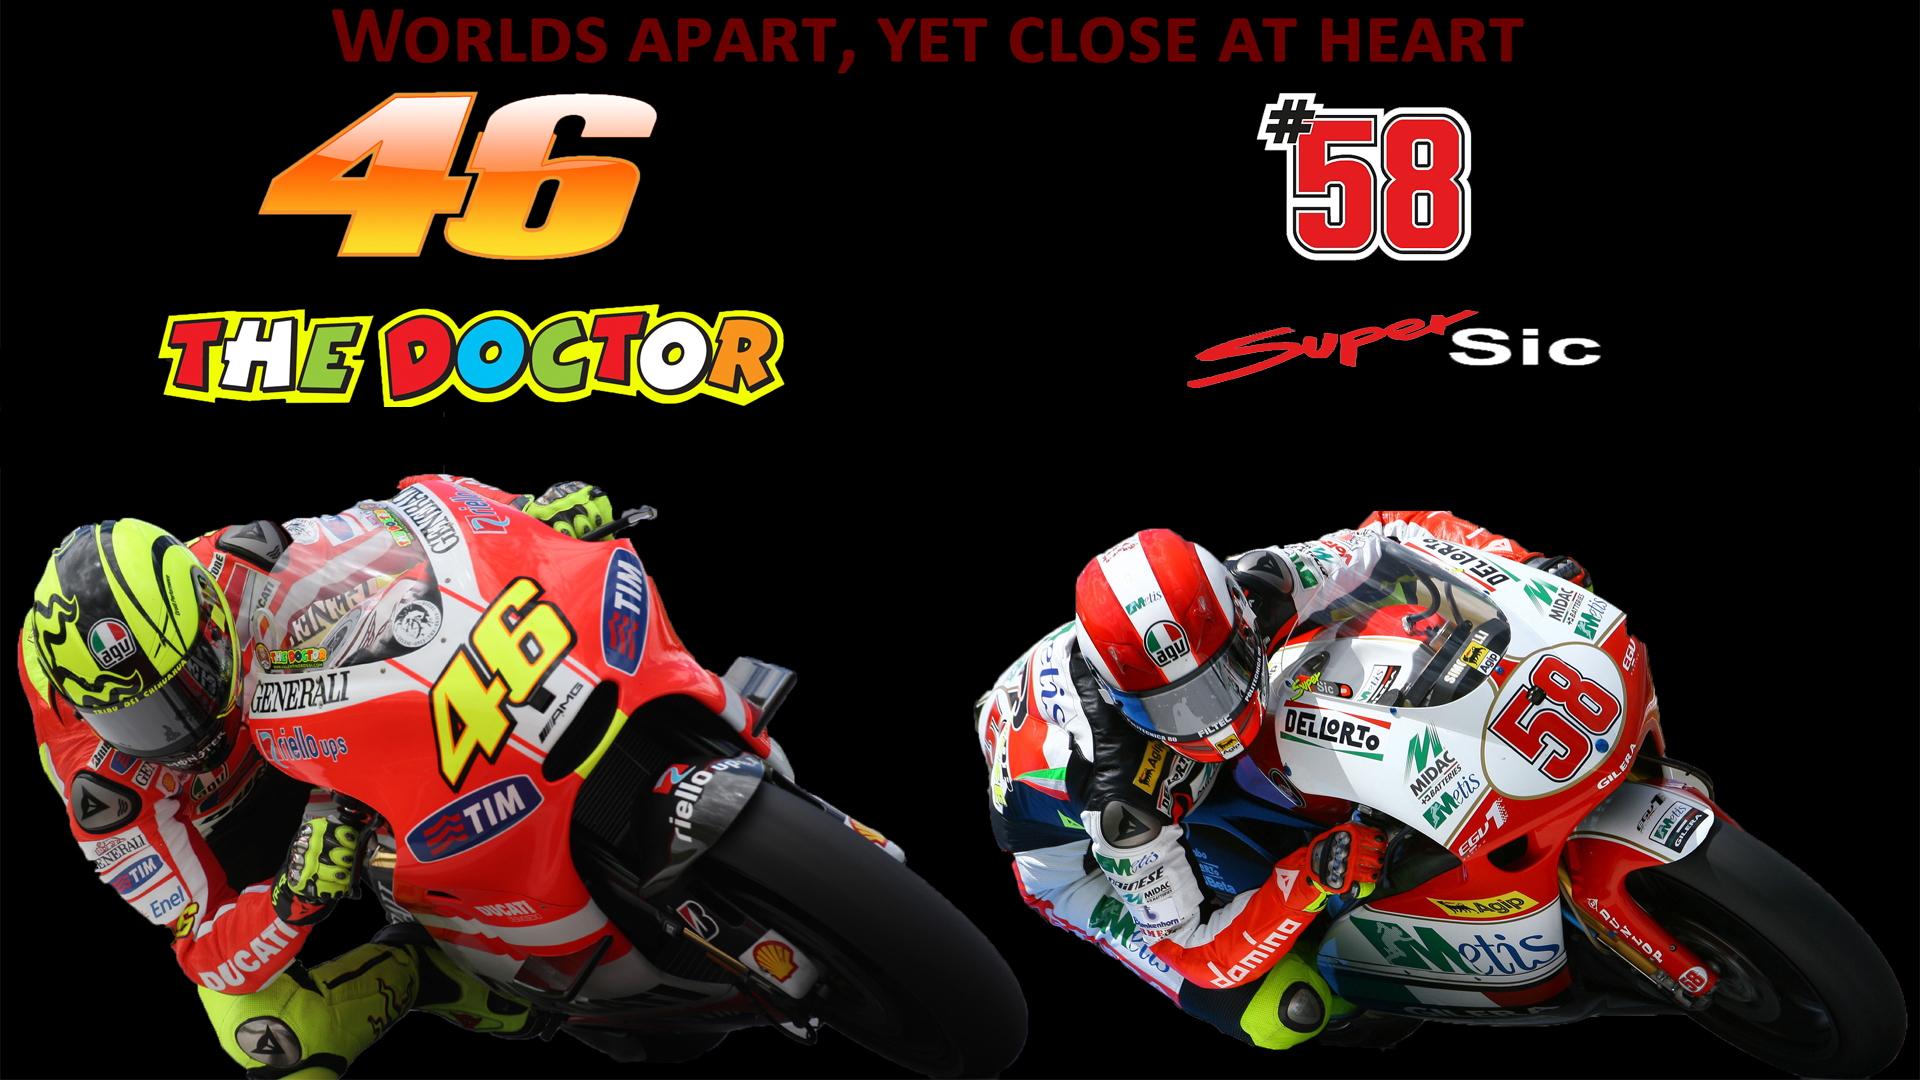 worlds apart, yet close at heart* - Valentino Rossi Wallpaper ...